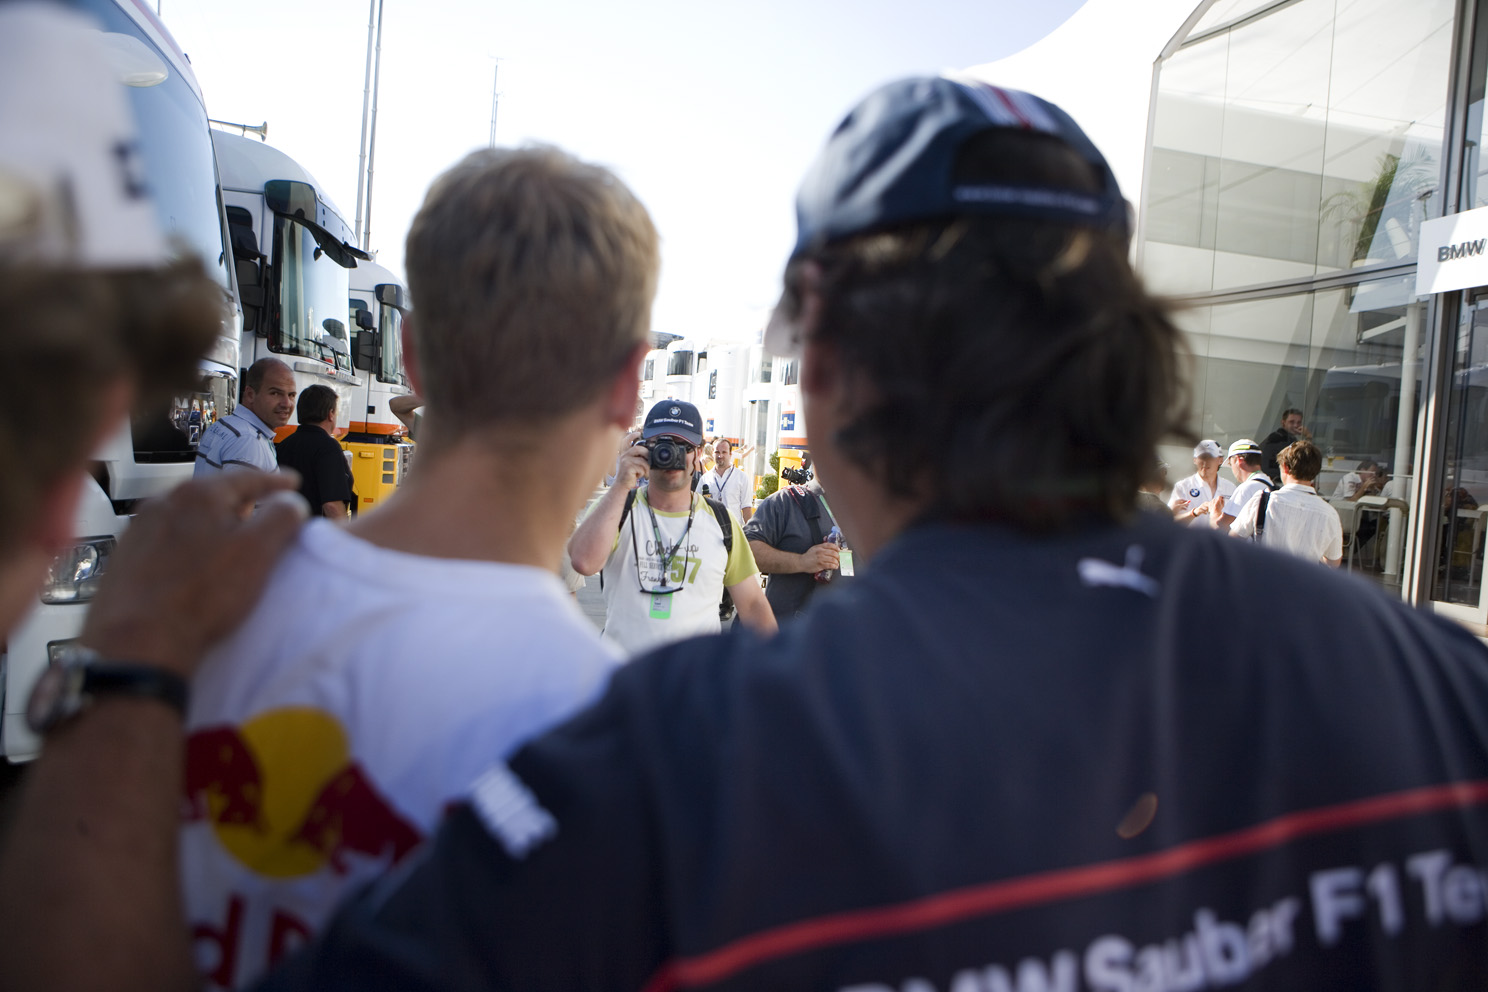 Sebastian Vettel stops to have his photo taken with fans at the Hungarian Grand Prix